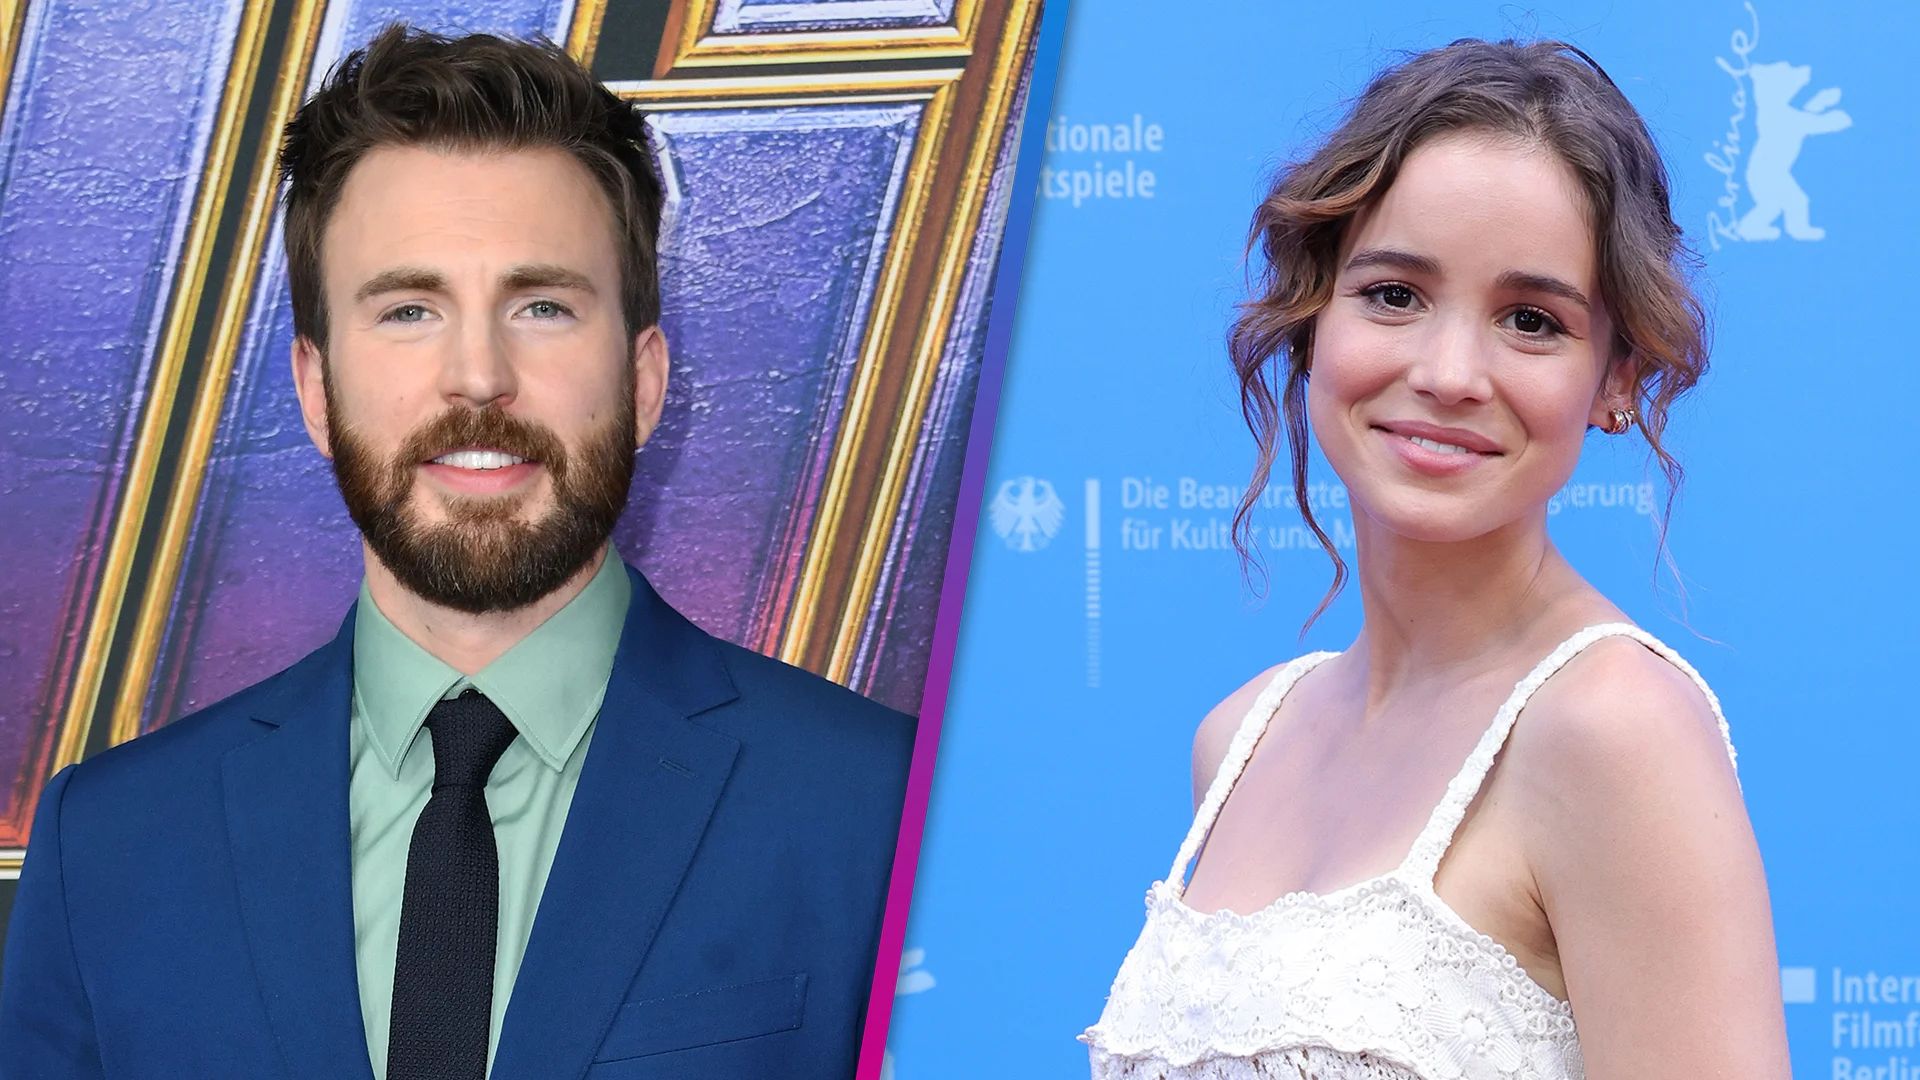 Chris Evans Ties The Knot With Alba Baptista In Intimate Ceremony